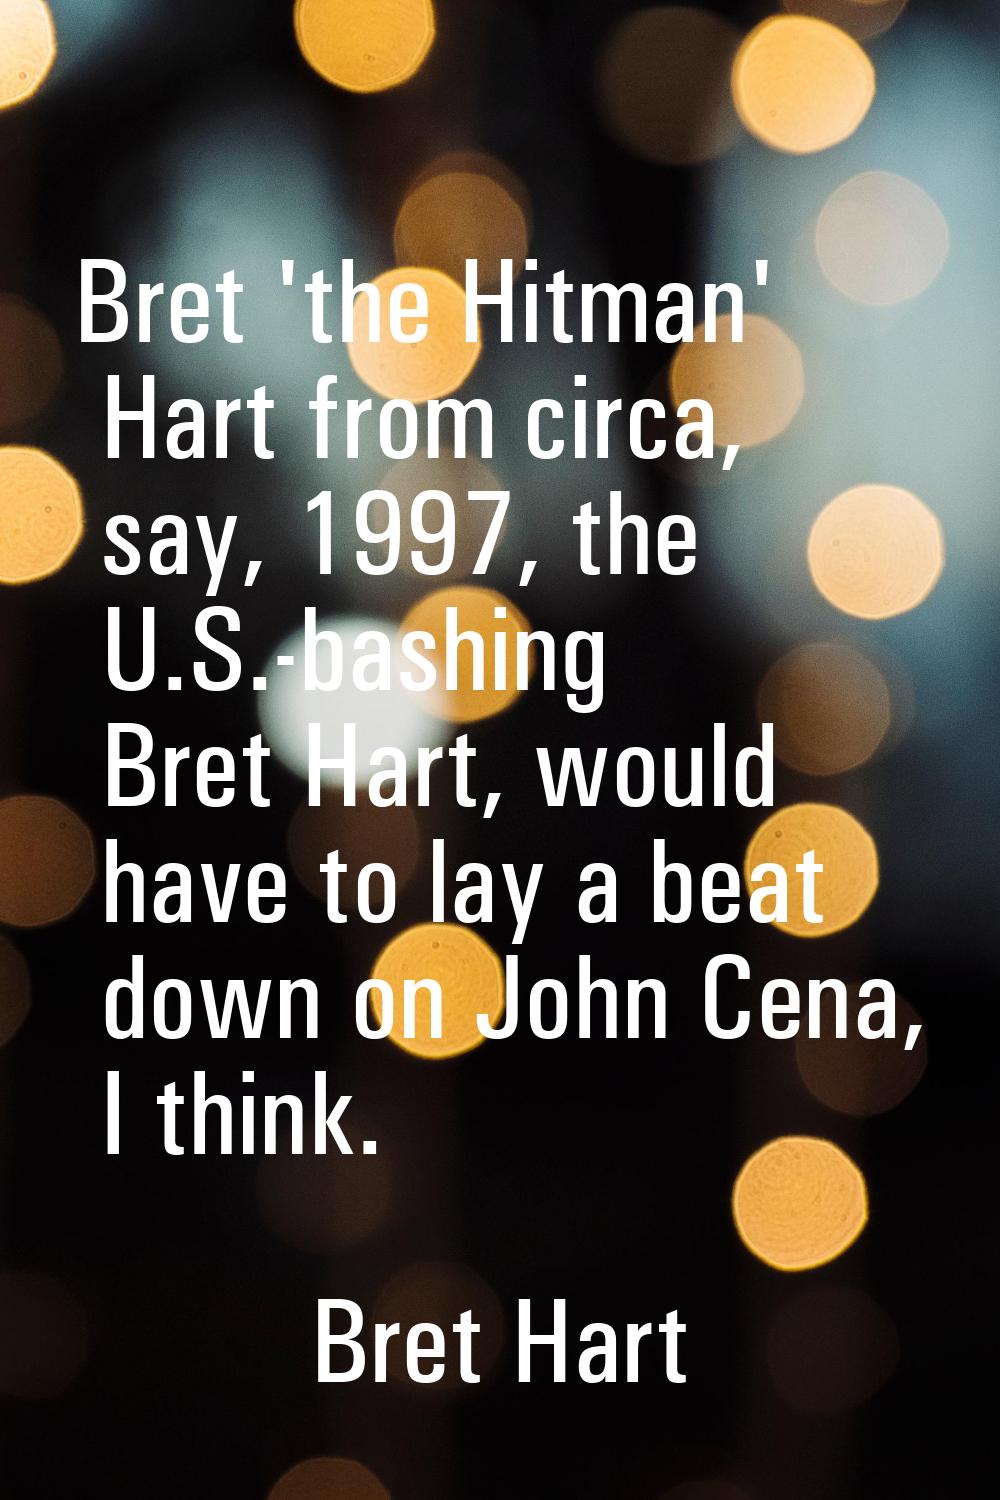 Bret 'the Hitman' Hart from circa, say, 1997, the U.S.-bashing Bret Hart, would have to lay a beat 